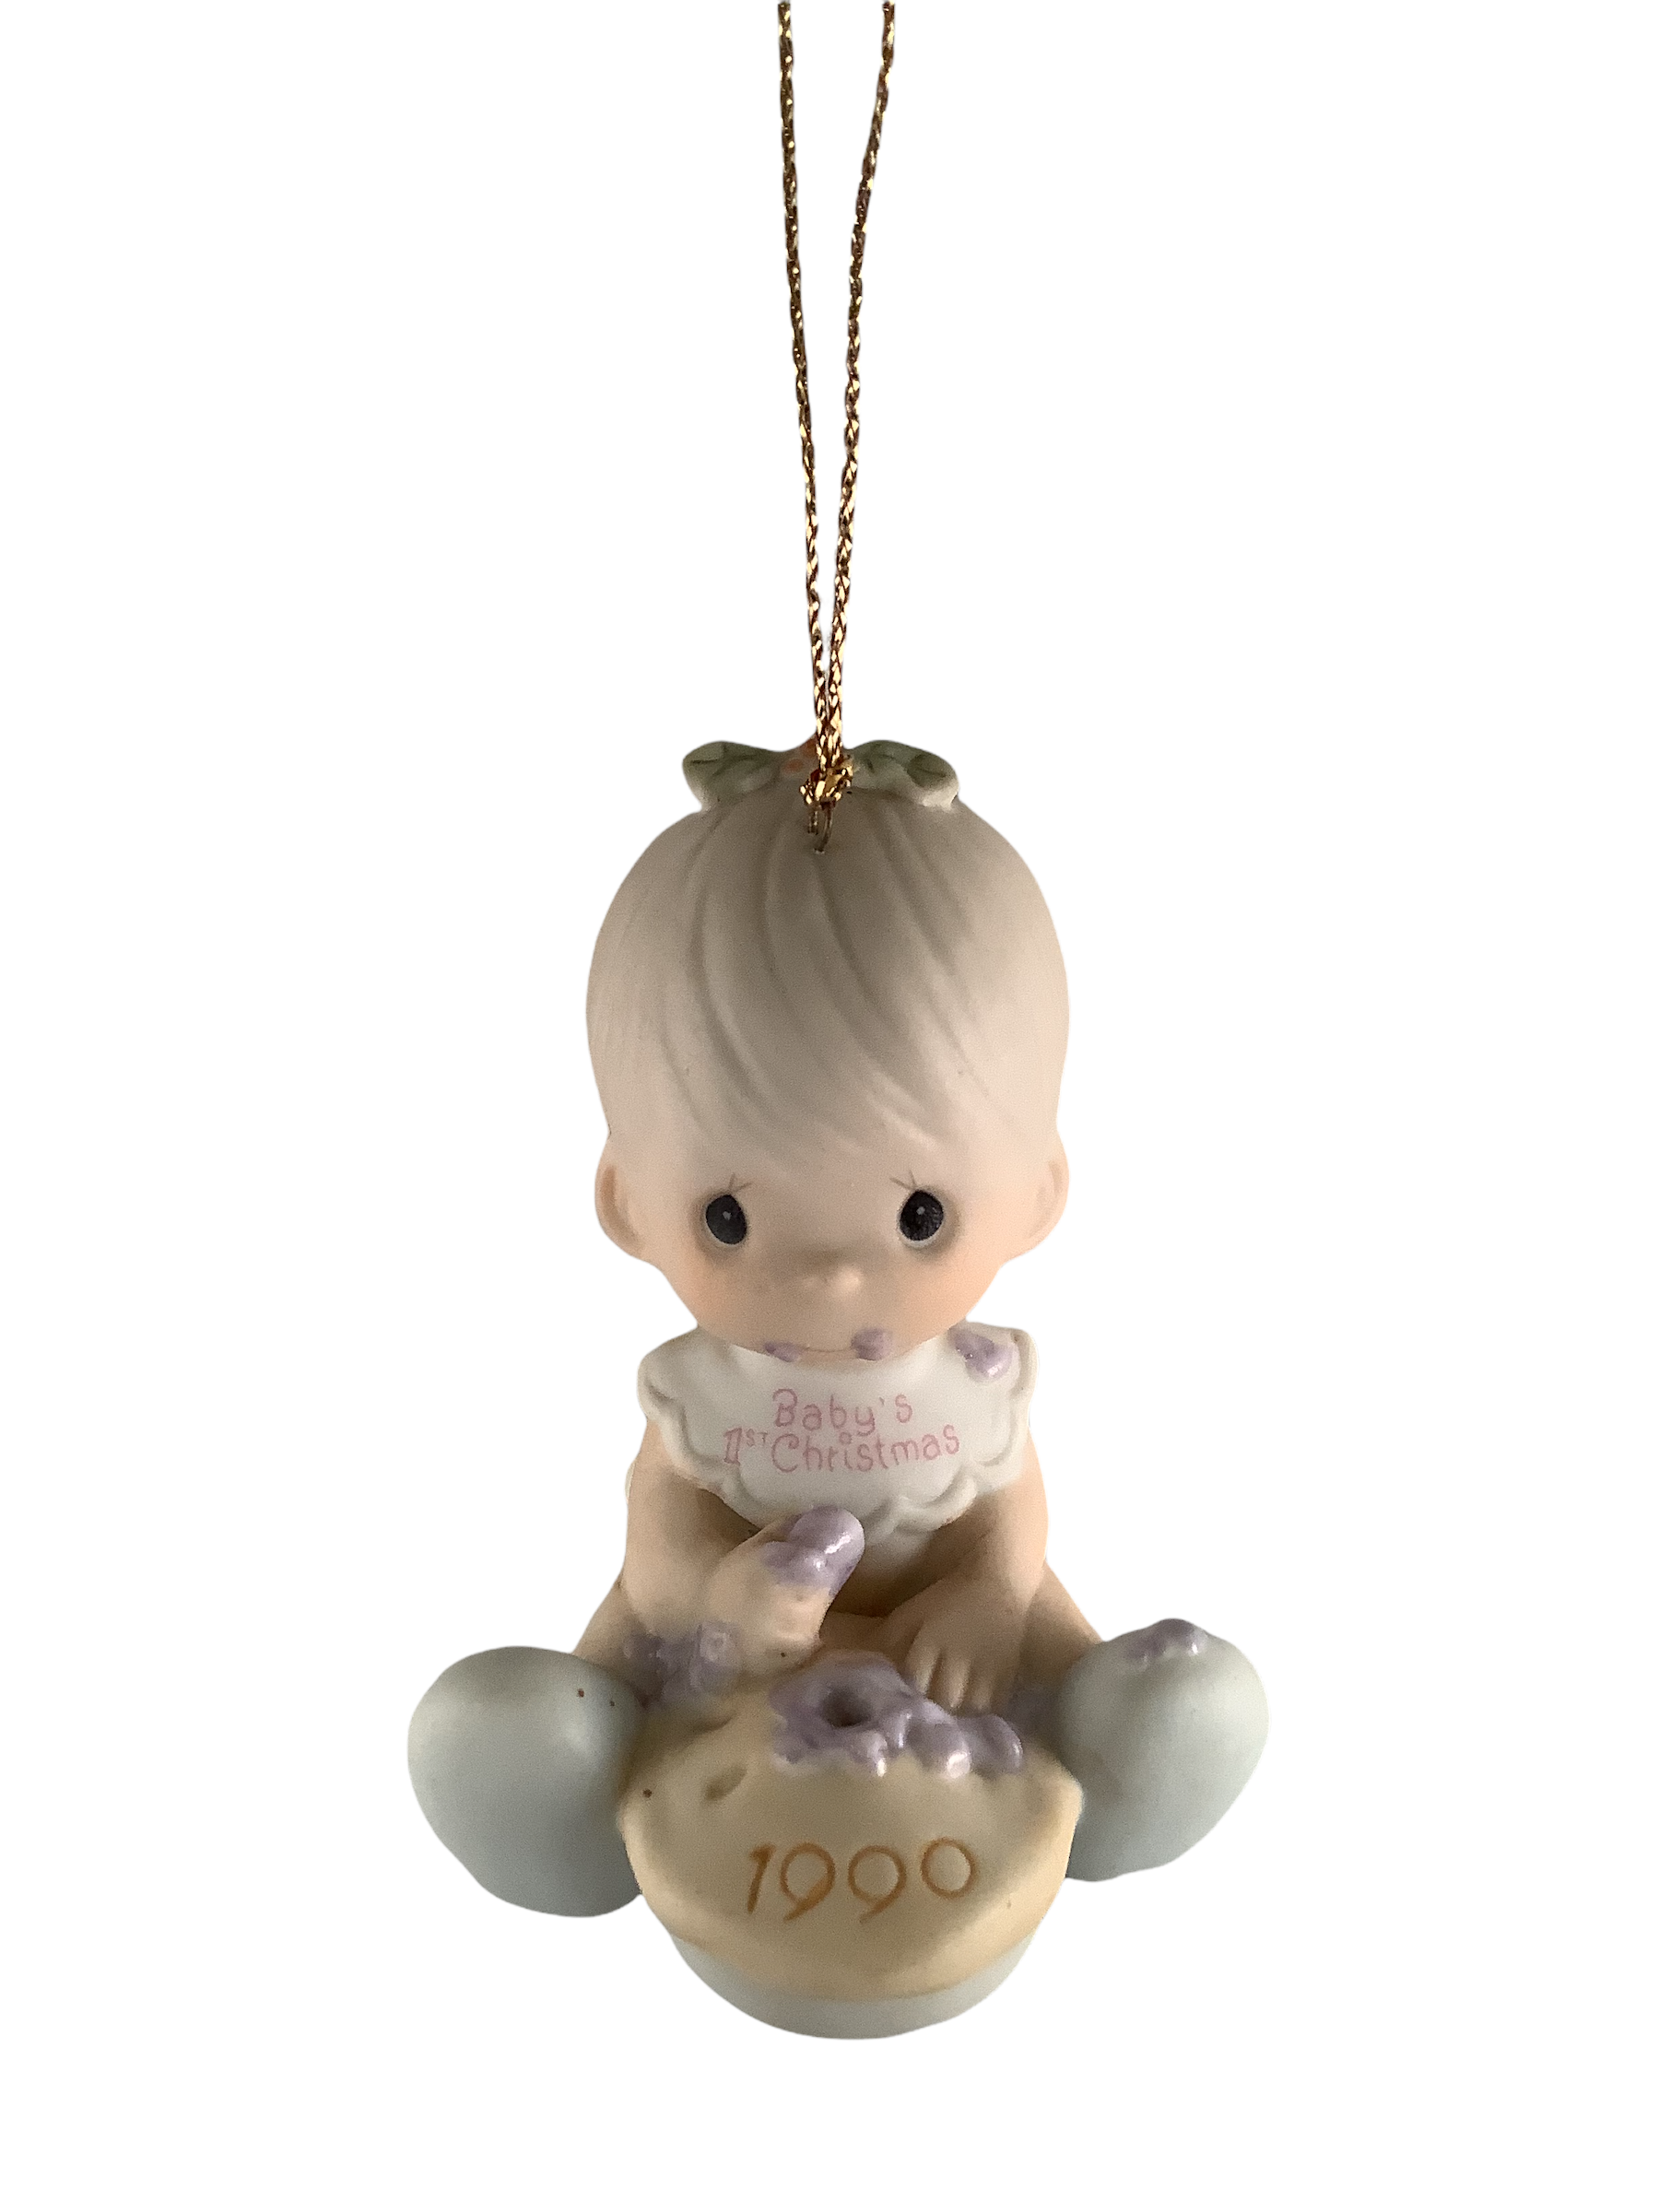 Baby's First Christmas 1990 (Boy) - Precious Moments Ornament